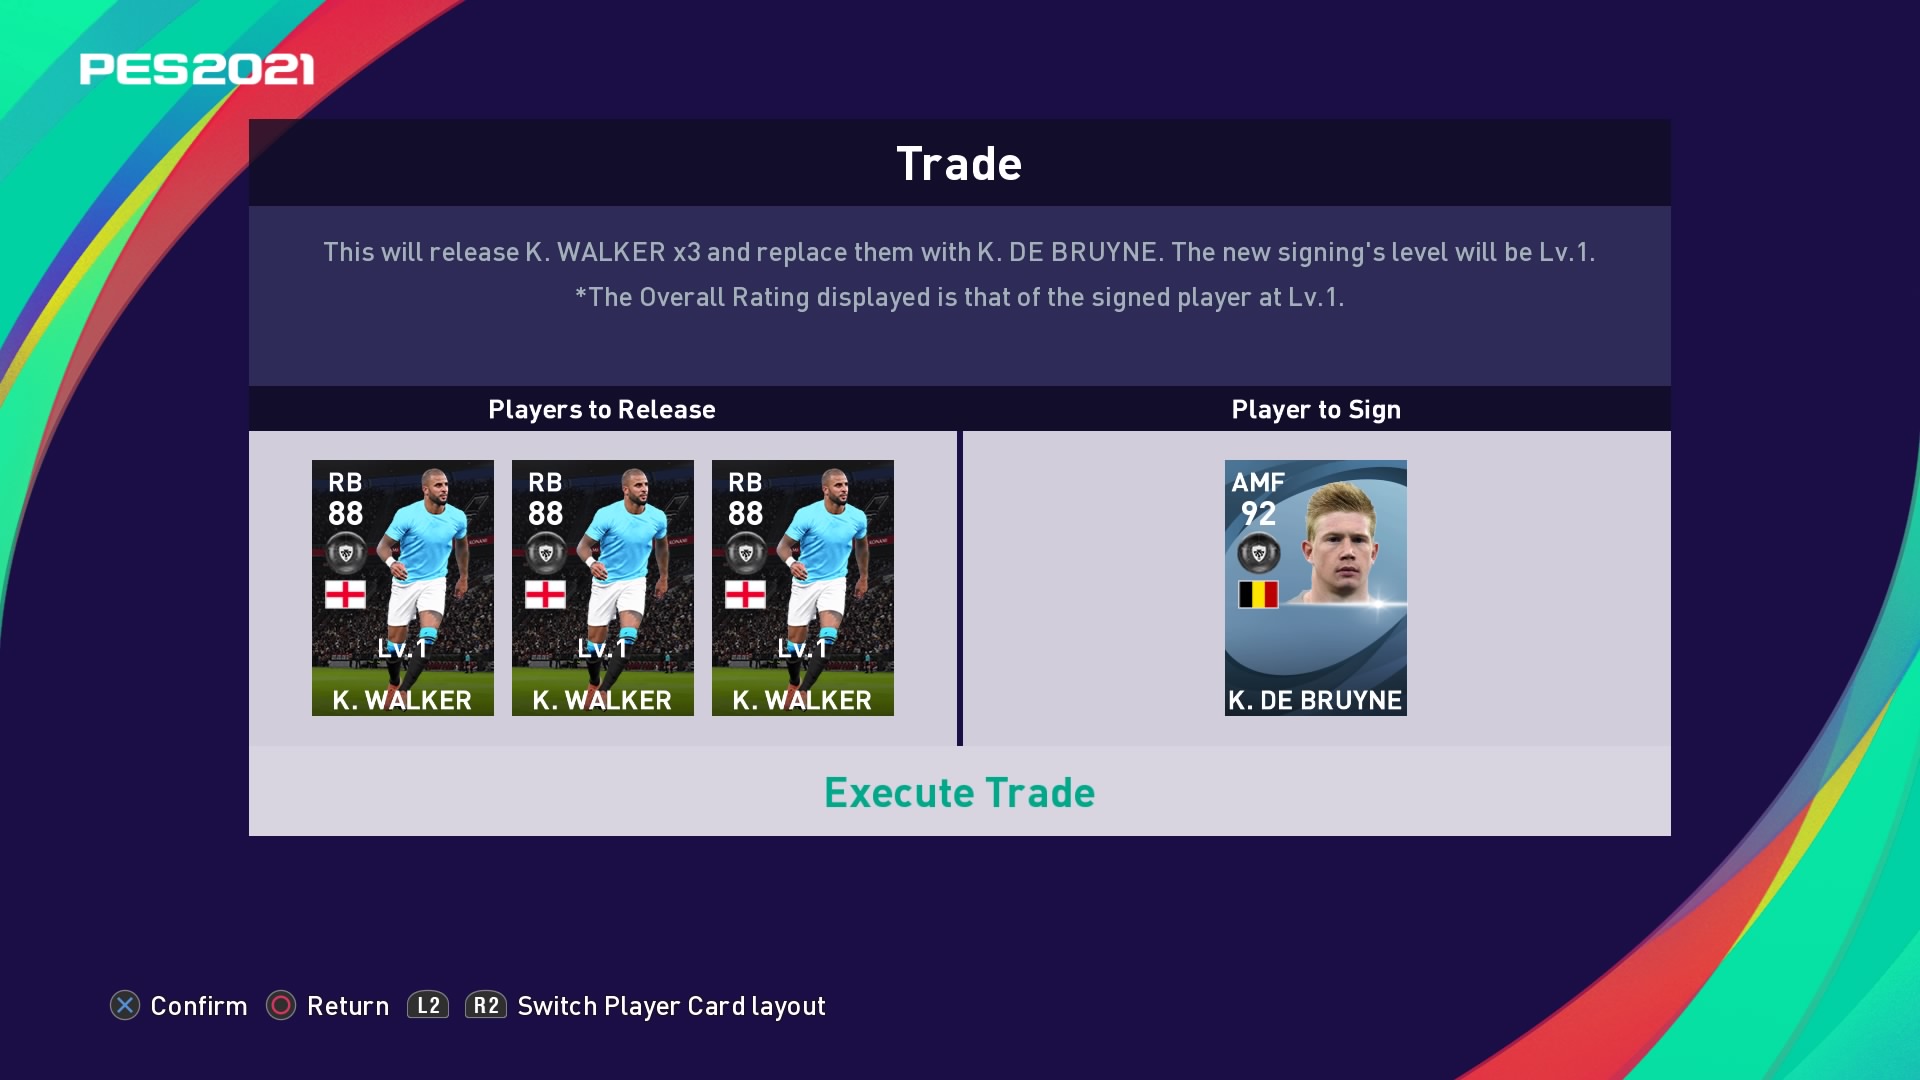 Confirming the player to trade in PES 2021